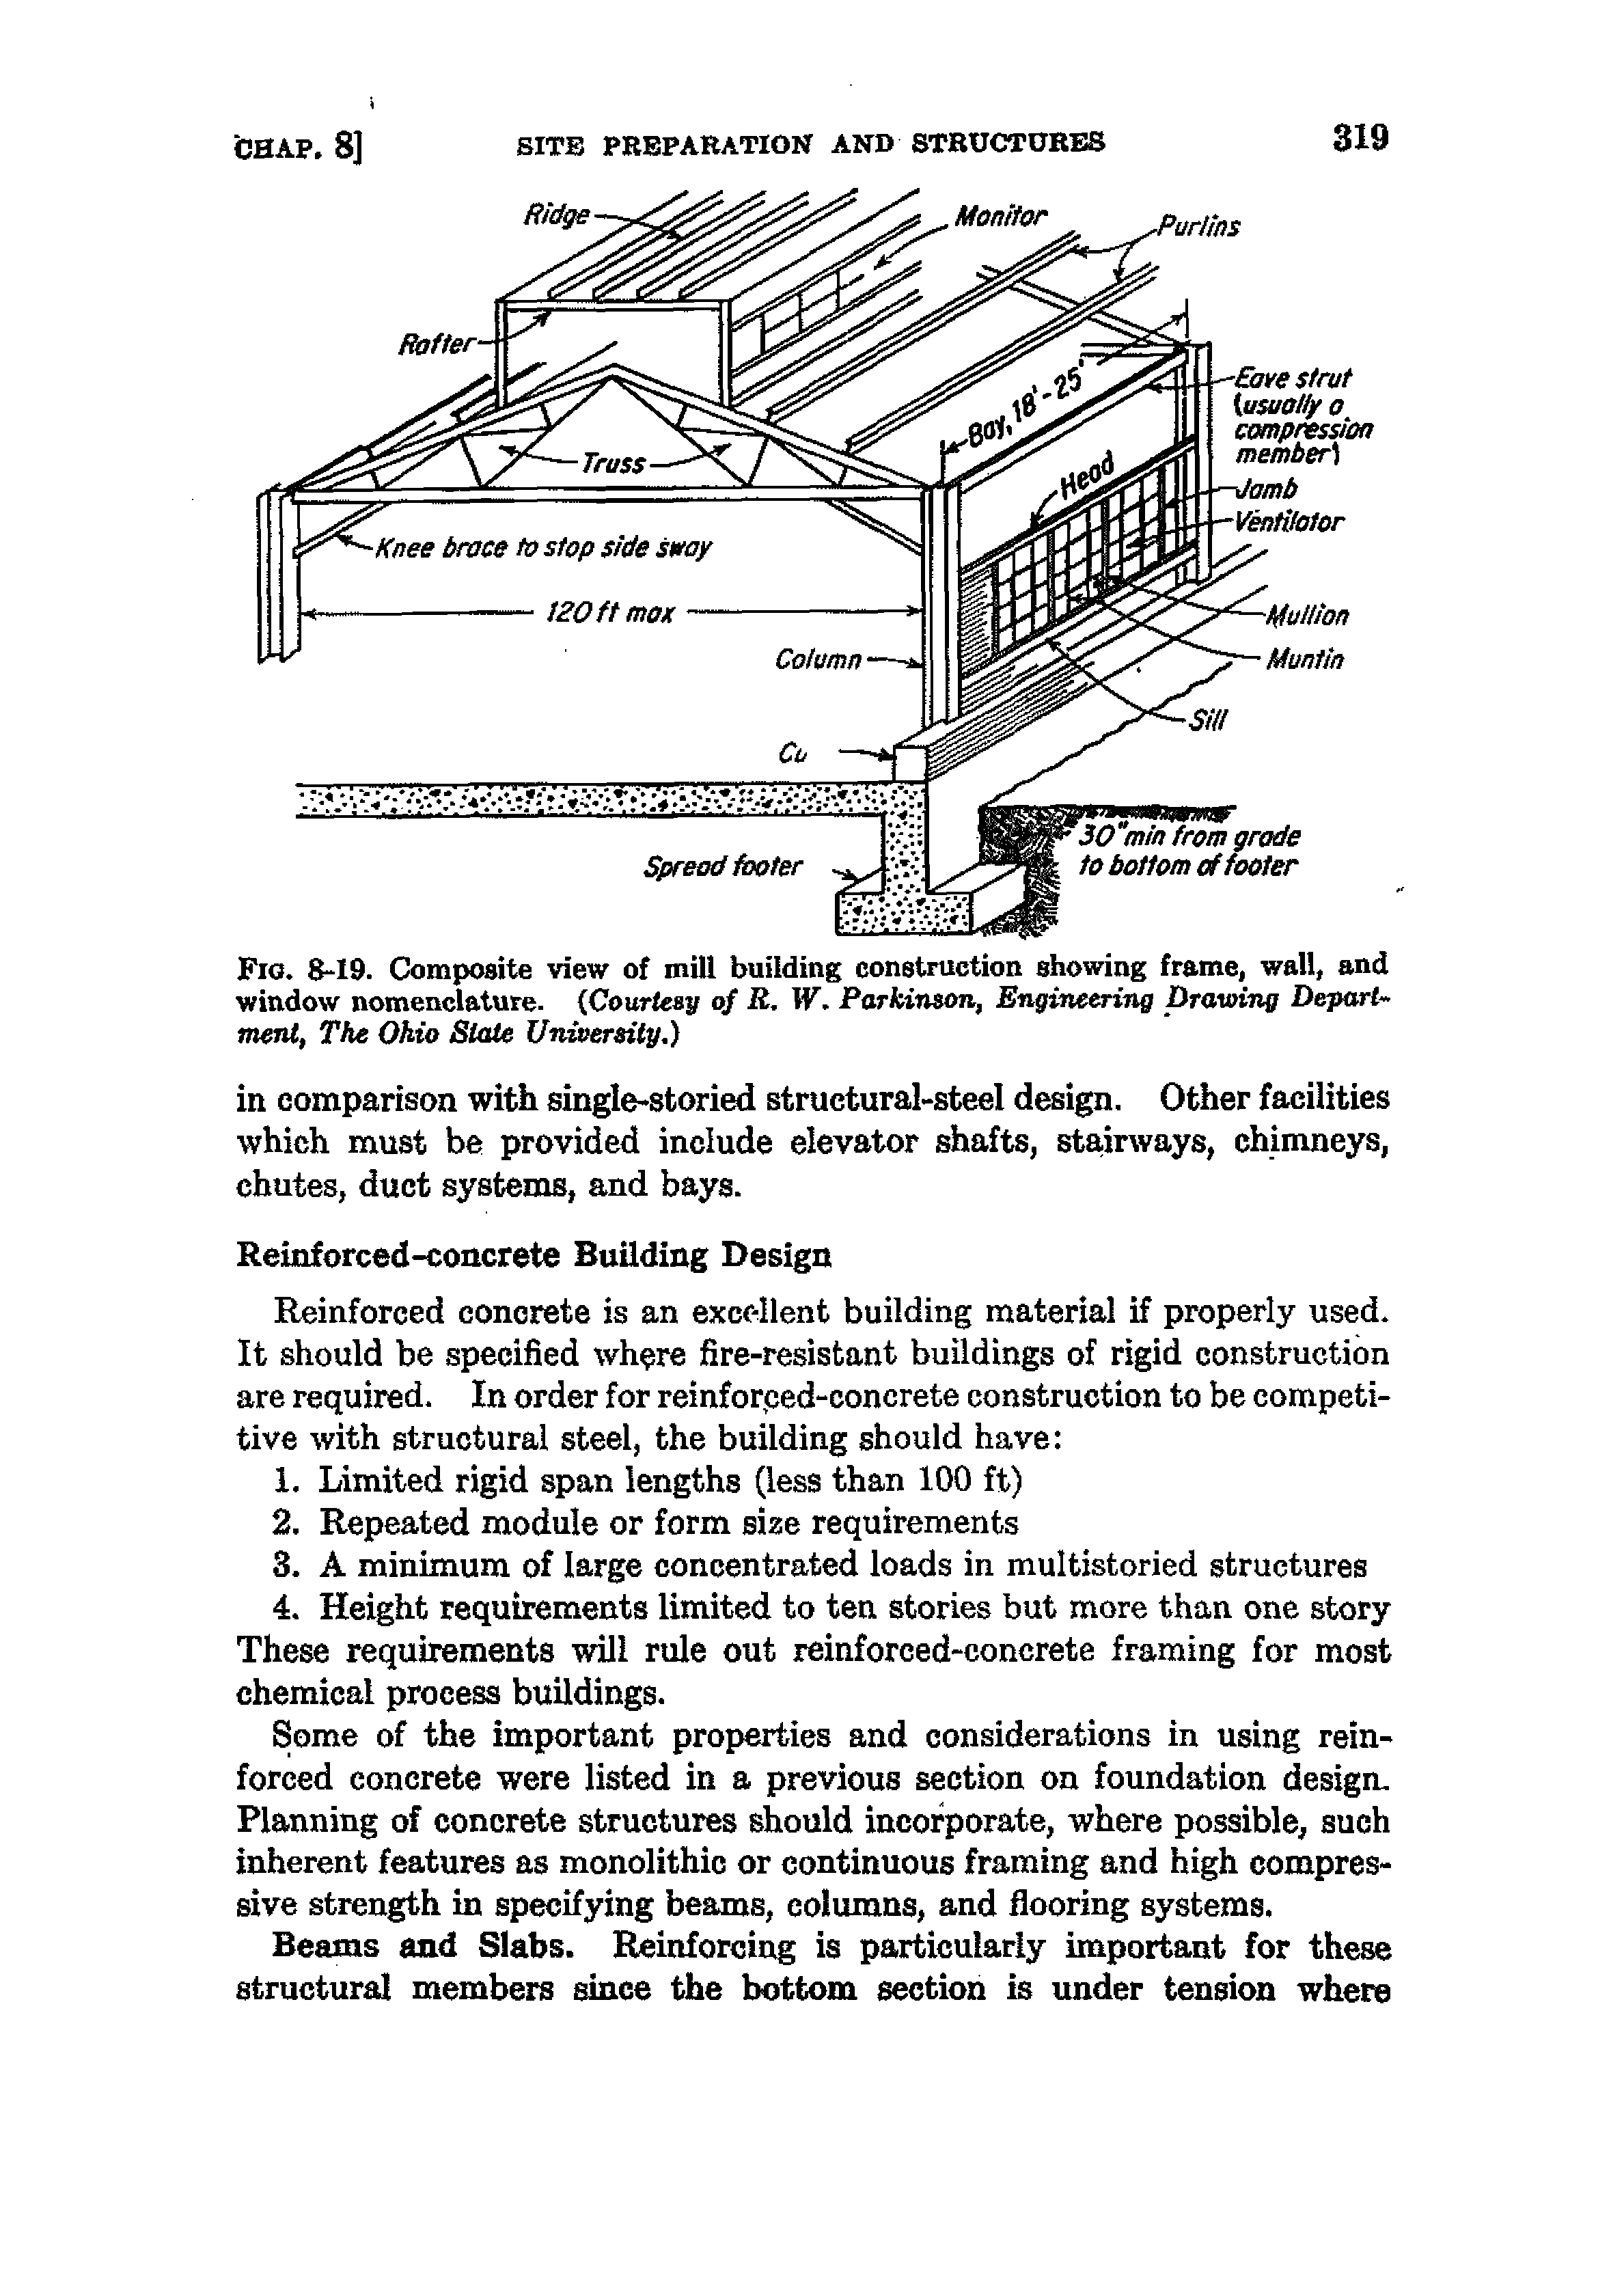 Fig. 8-19. Composite view of mill building construction showing frame, wall, and window nomenclature. Courtesy of R, W, Parkinson, Engineering Drawing Departs ment, The Ohio Stale Unioersity.)...